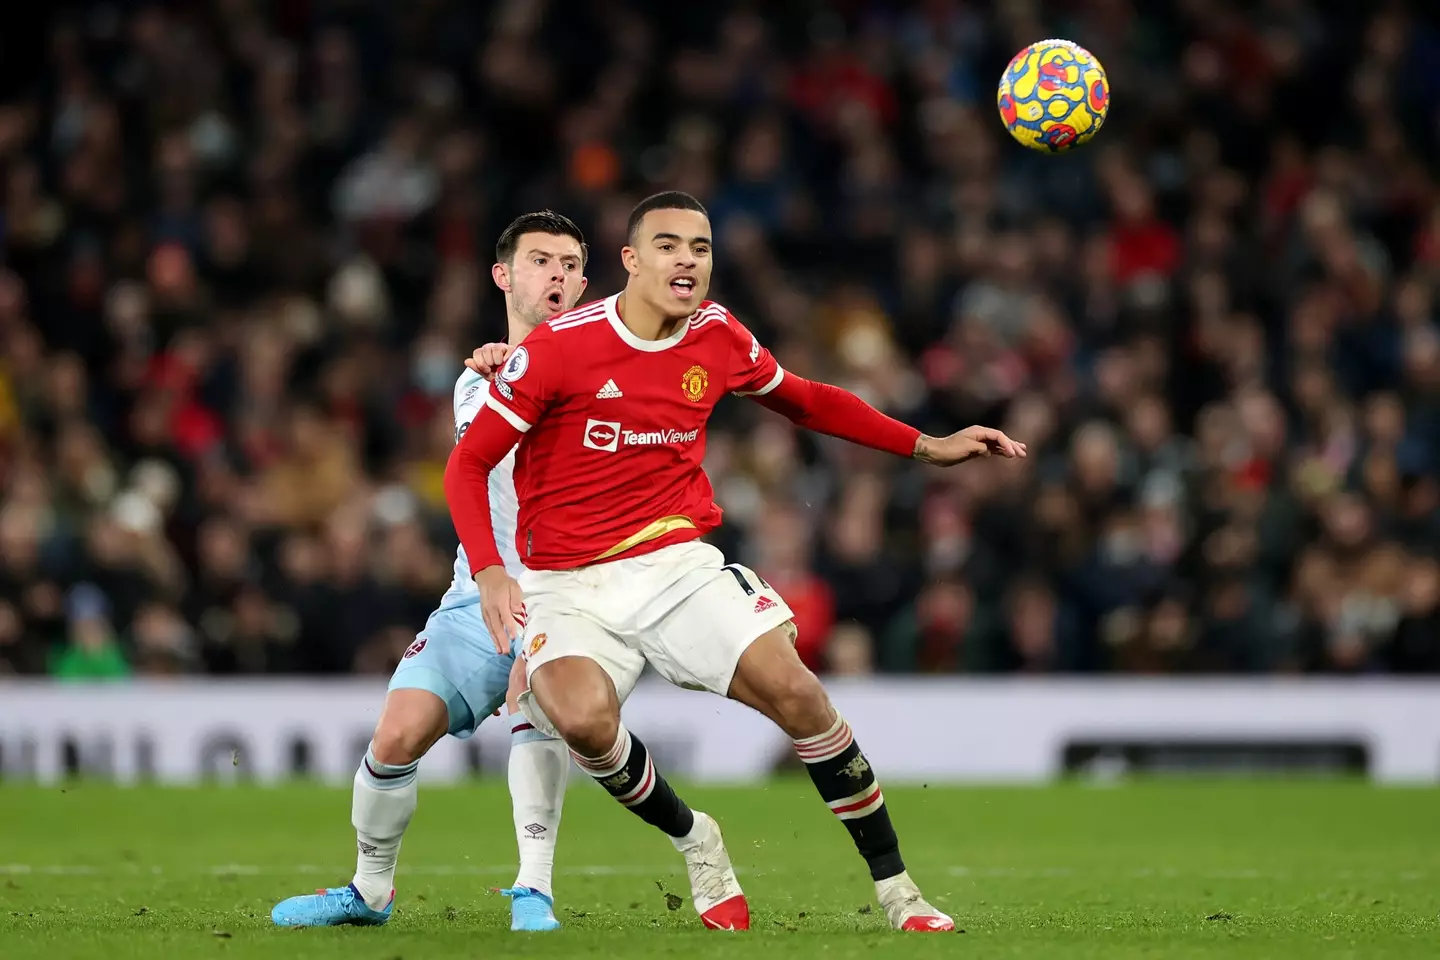 Mason Greenwood in action for Manchester United. Image: Getty